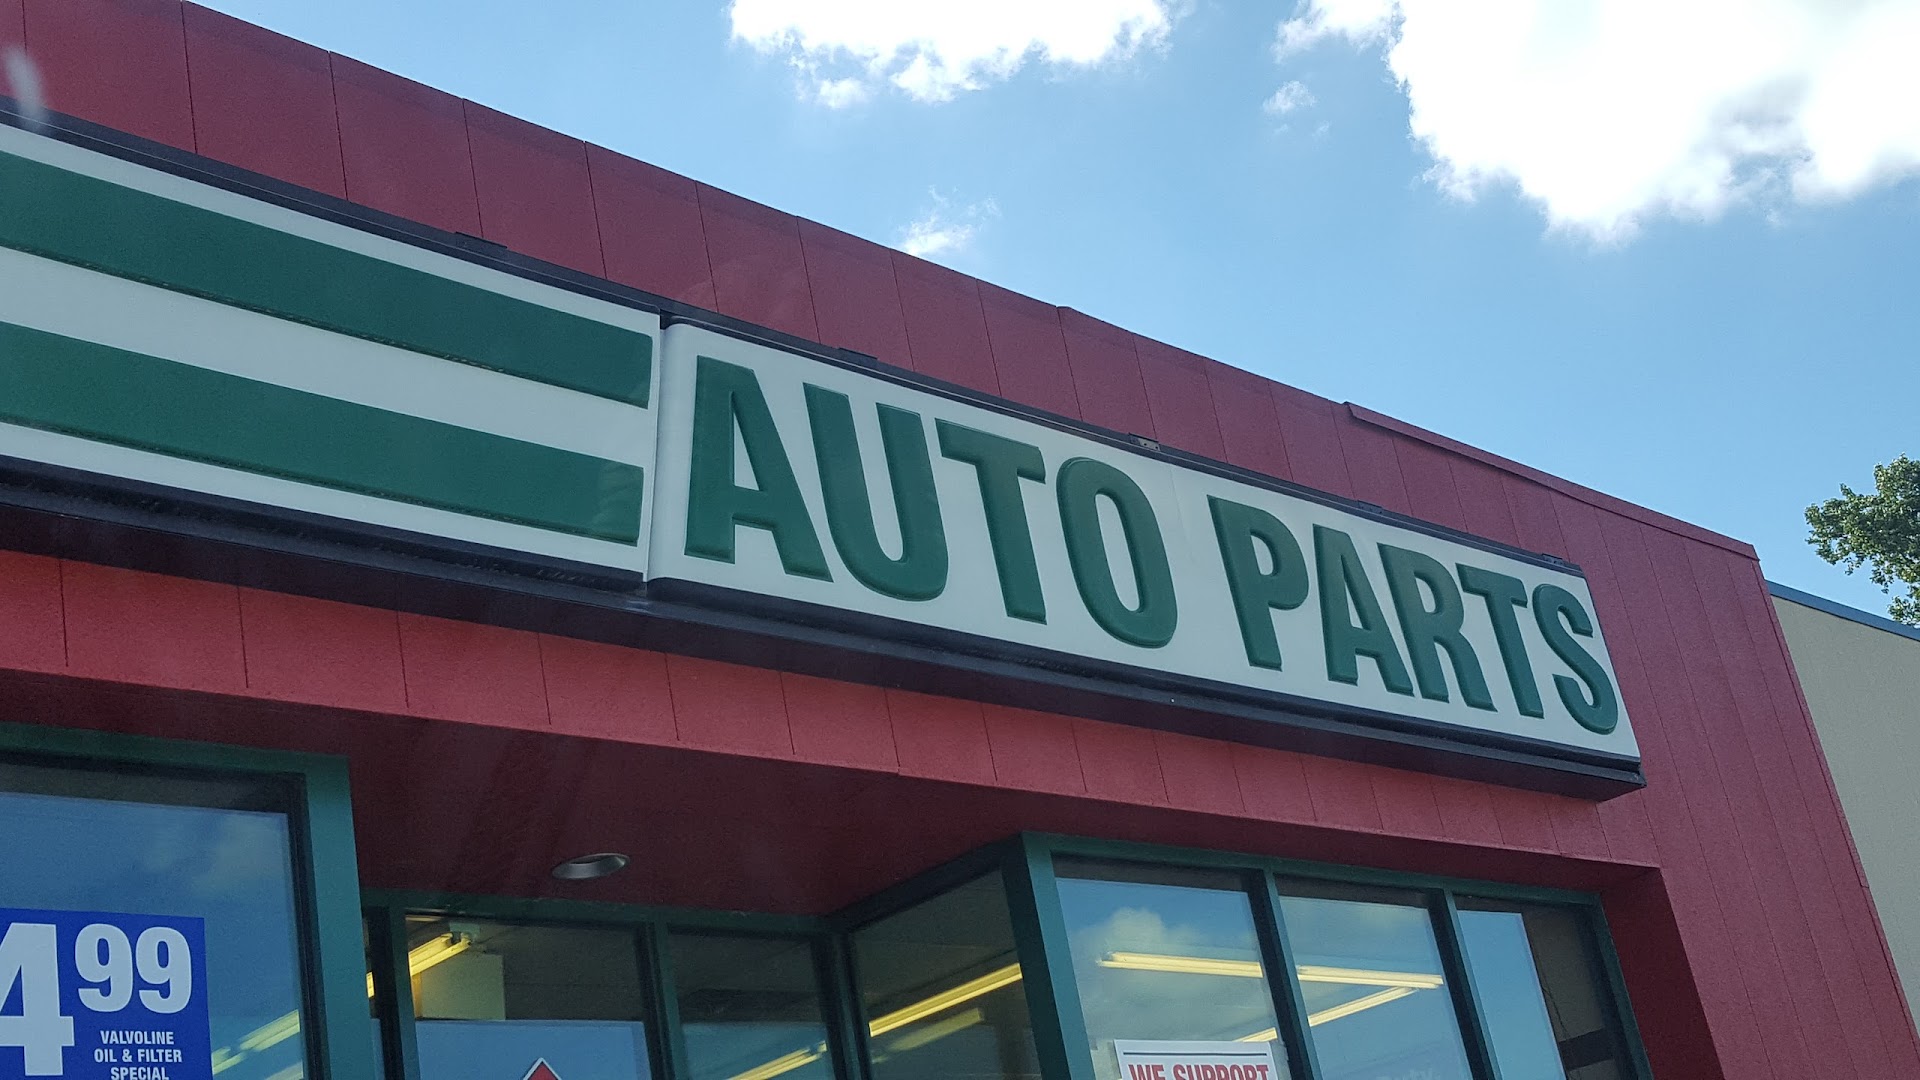 Auto parts store In Meridian MS 